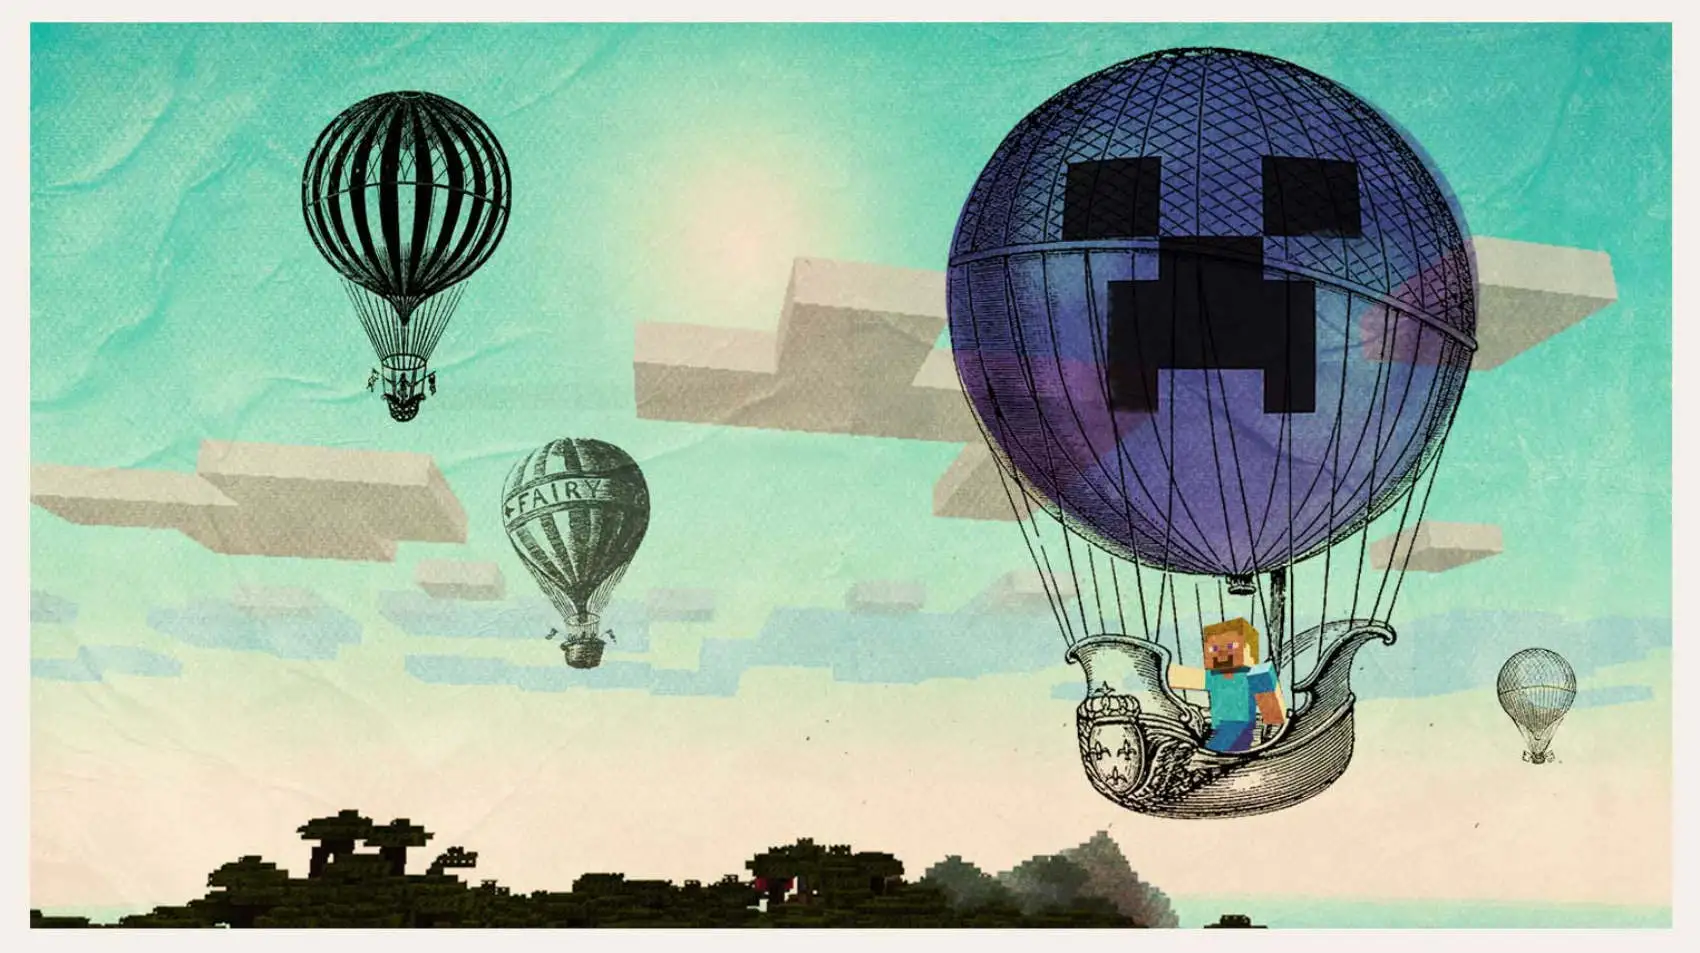 Minecraft Steve in a hot air balloon that has the face of a creeper